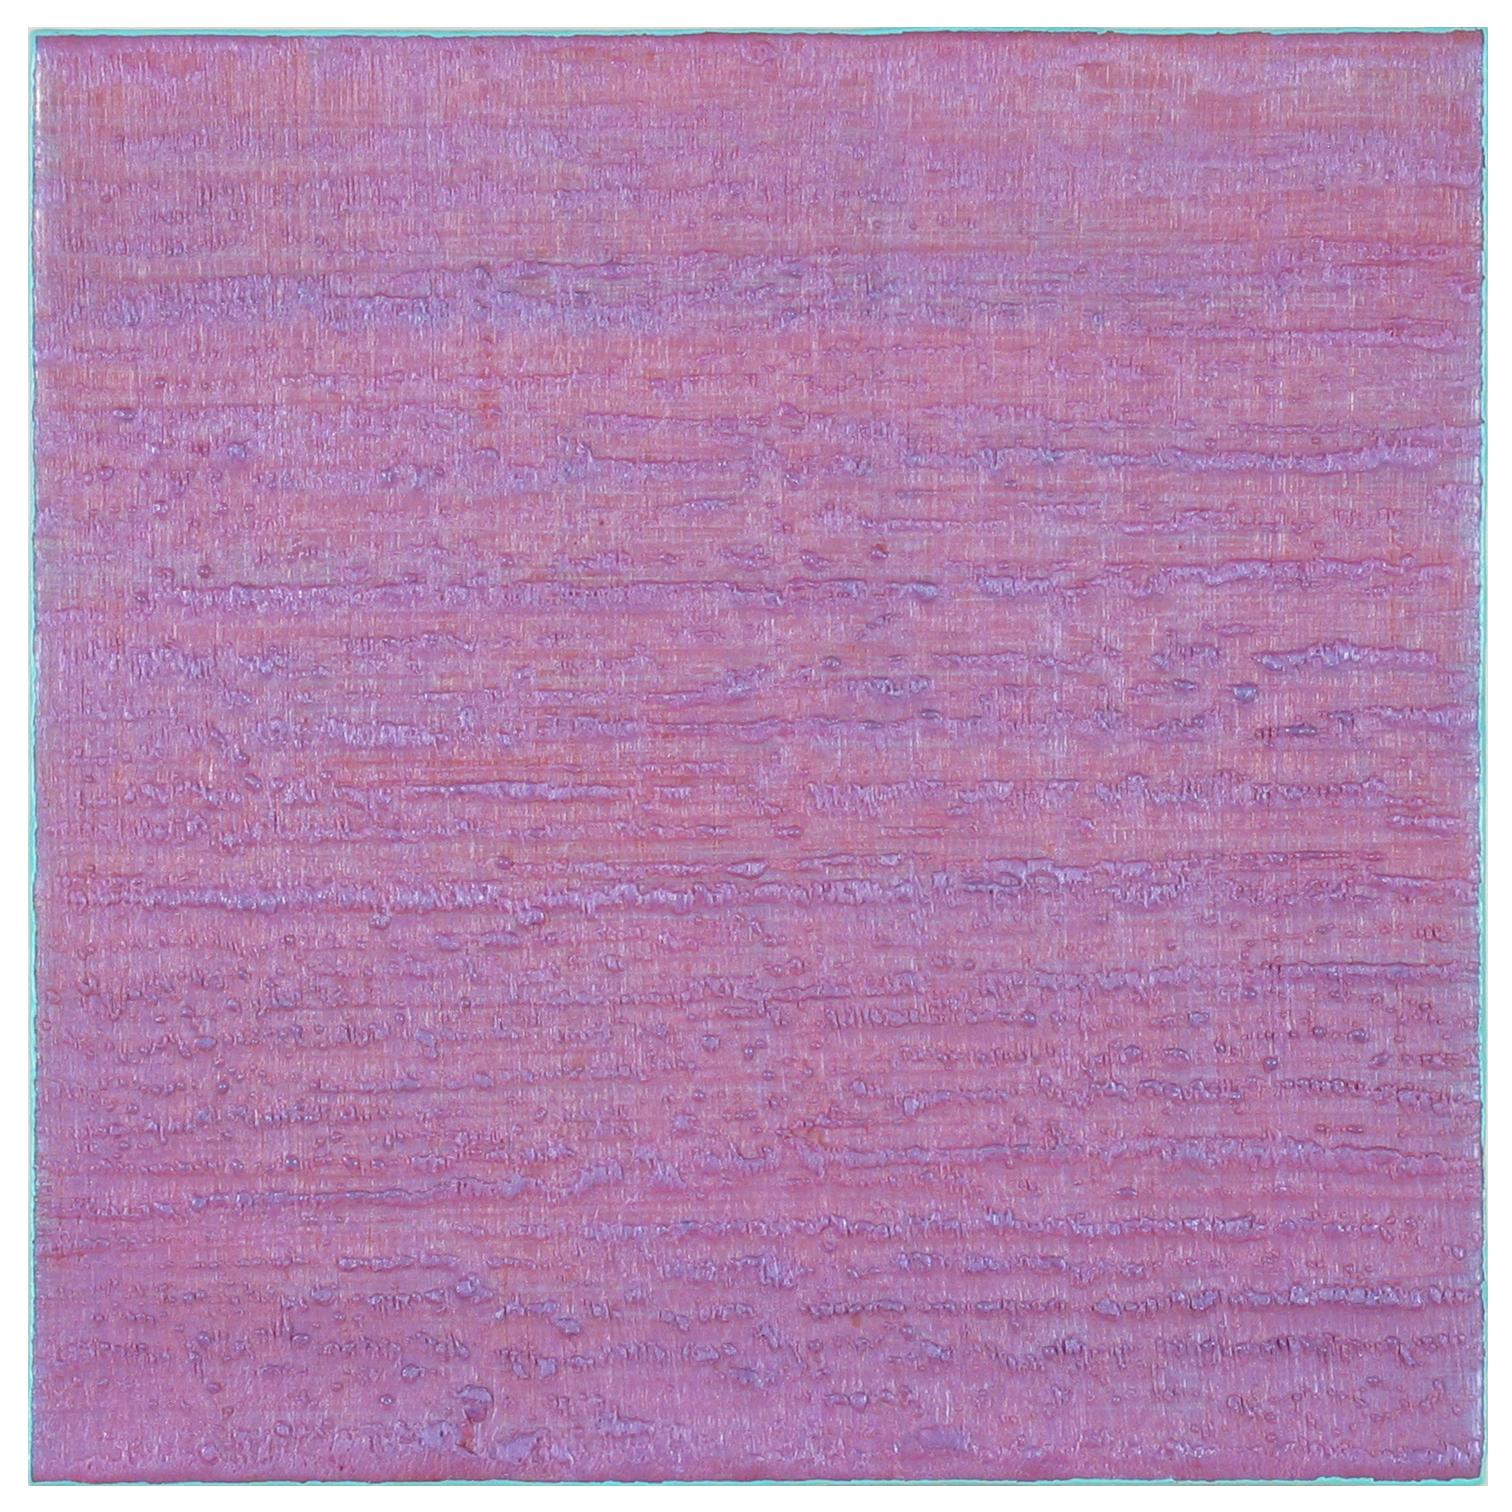 Joanne Mattera Abstract Painting - Silk Road 386, Pale Violet, Teal Blue Square Encaustic Color Field Painting